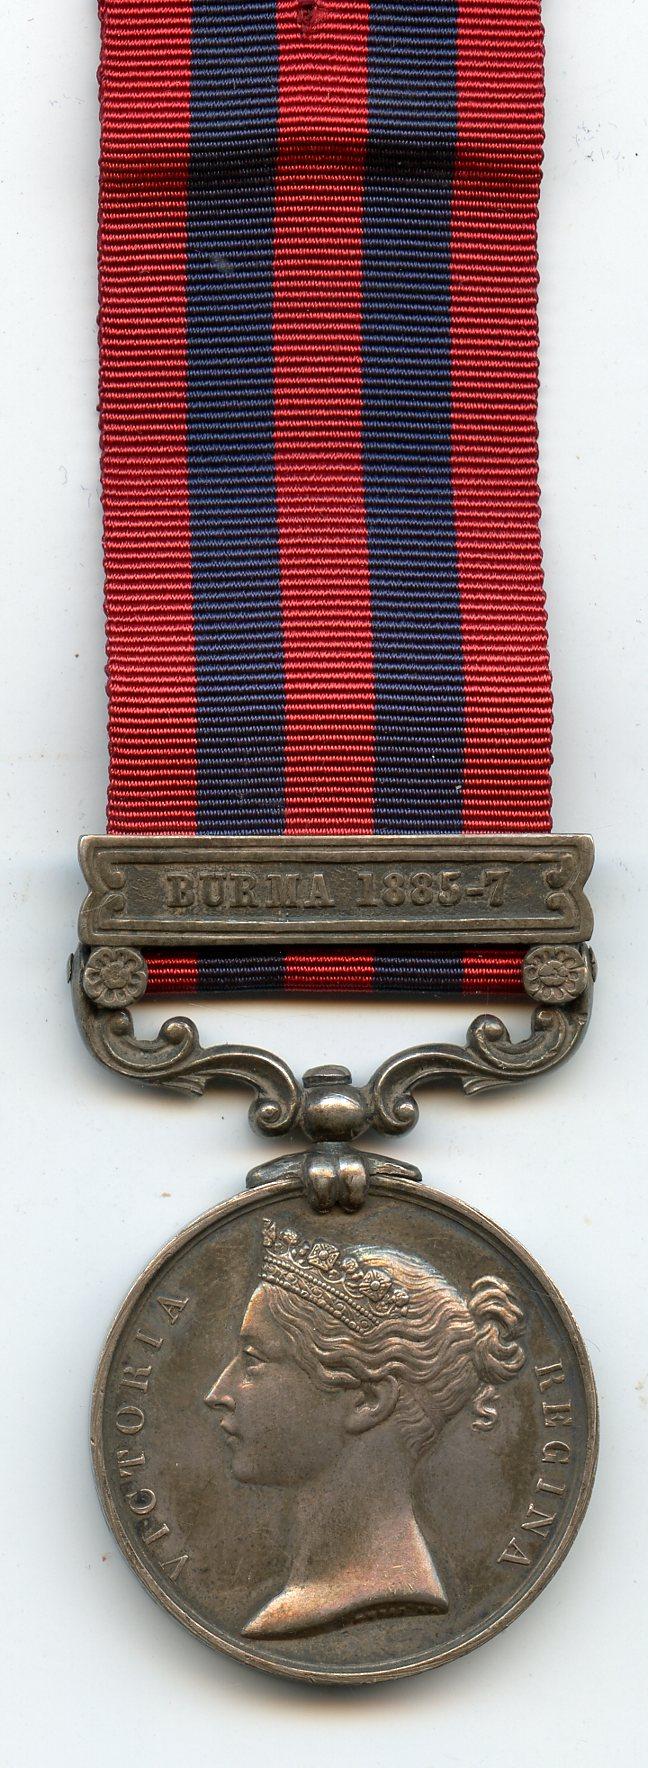 India General Service Medal 1854 Burma 1885-87 To Pte Andrew Wilson, Royal Scots Fusiliers